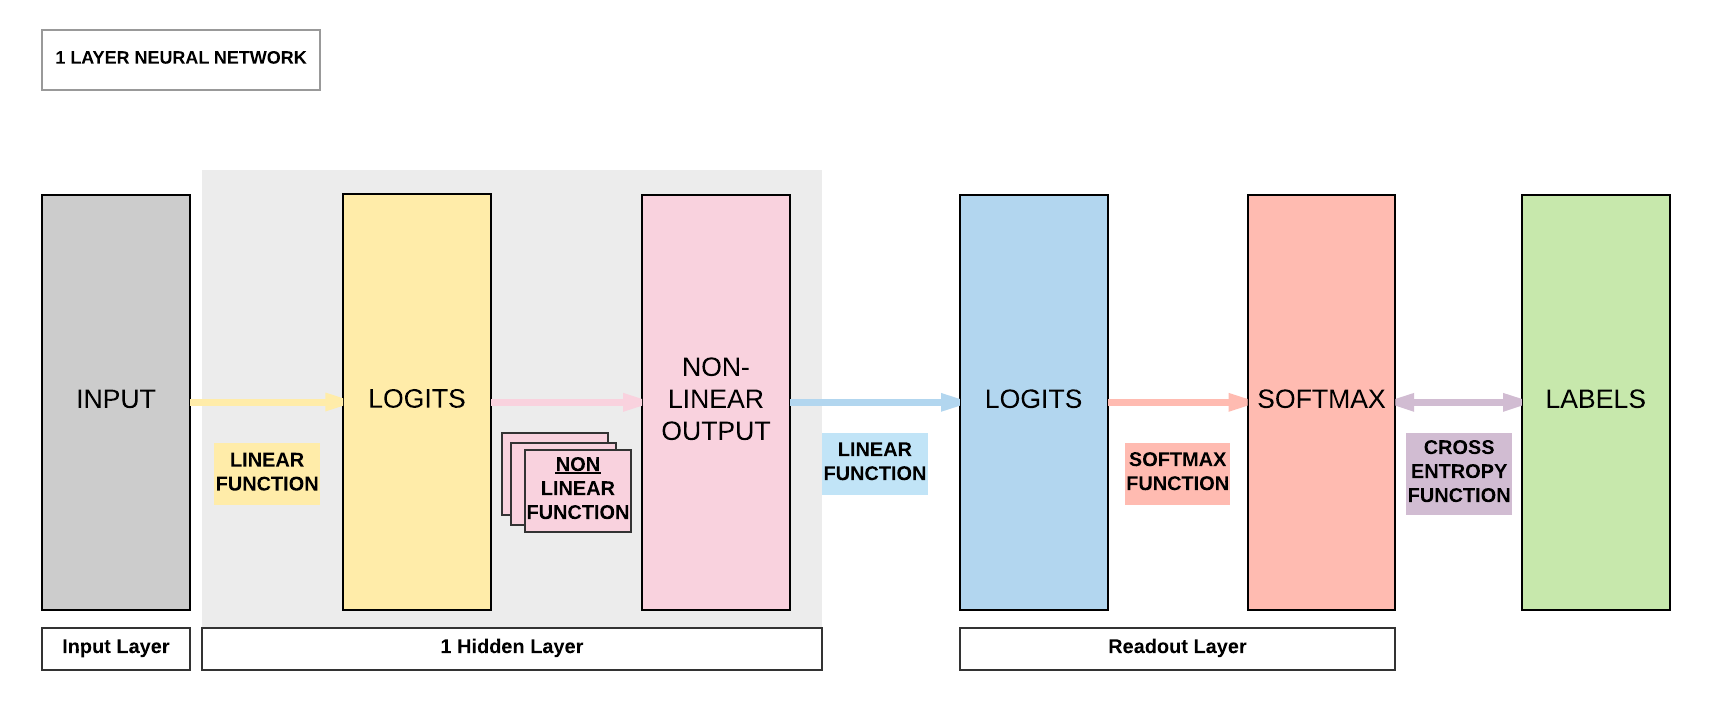 Line layering. Linear Neural Network. Linear layer. Fully connected Neural Network. Linear classification layer Neural Network.